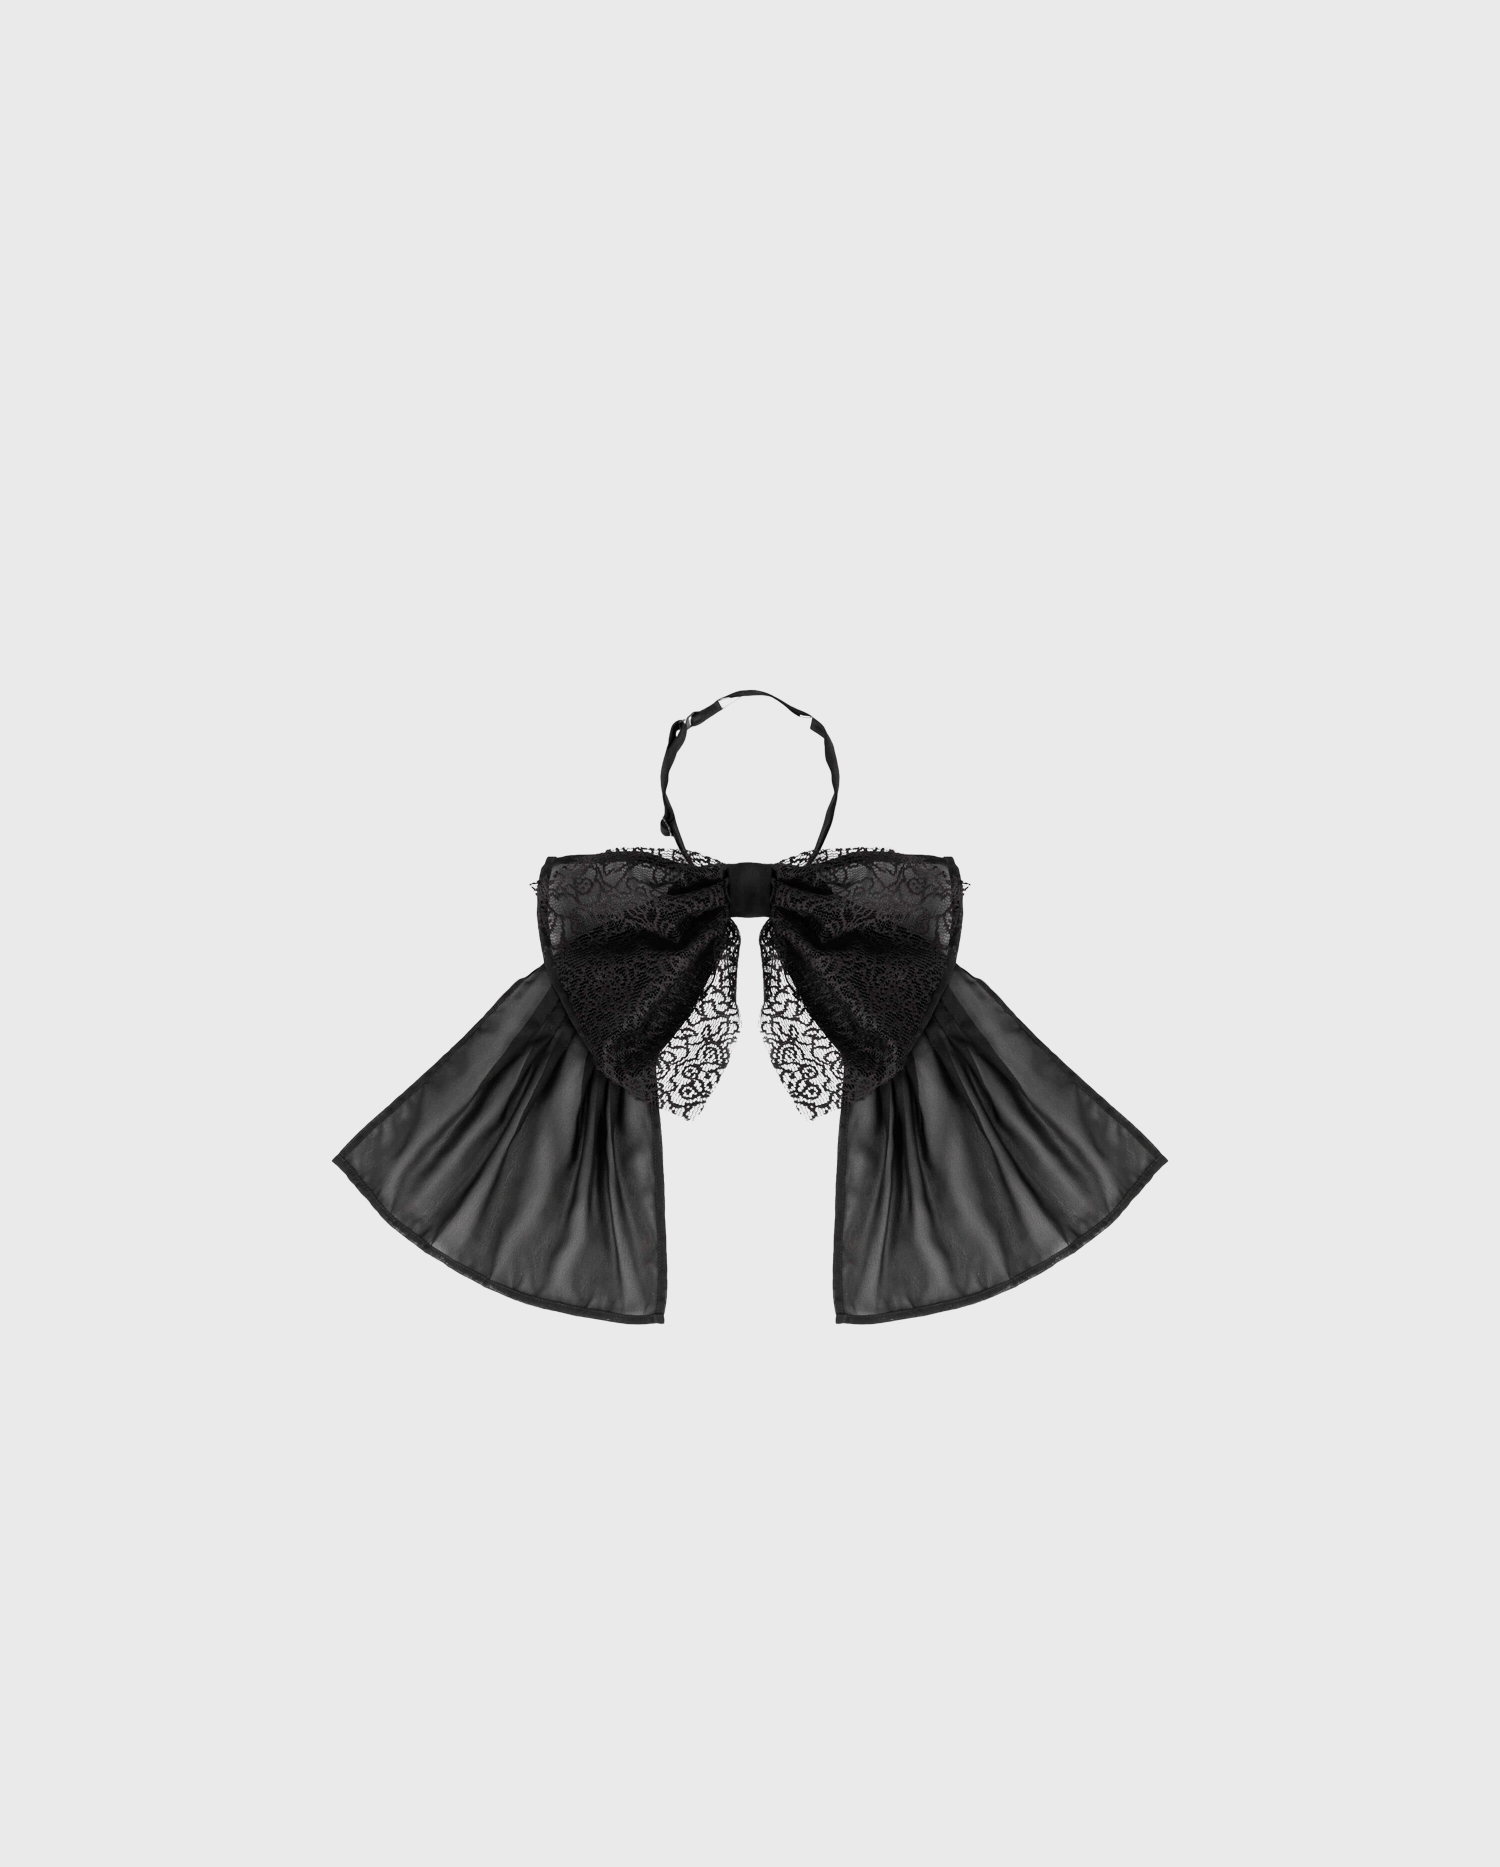 Discover the LINATRA bow shaped tie collar from ANNE FONTAINE